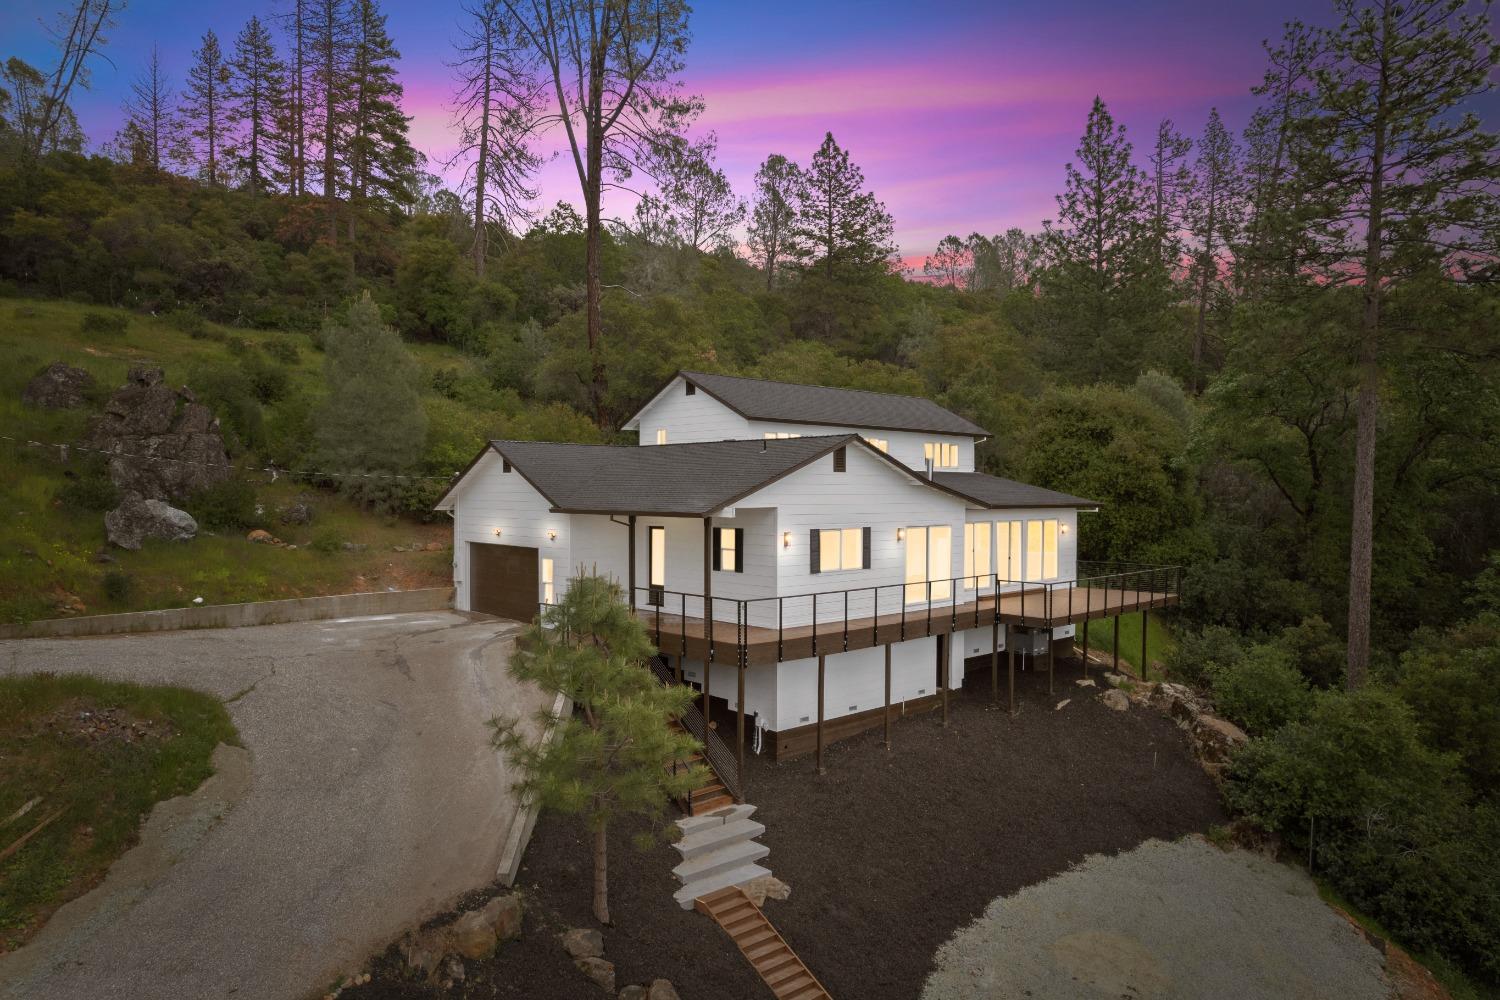 Photo of 16235 Indian Springs Ranch Rd in Grass Valley, CA